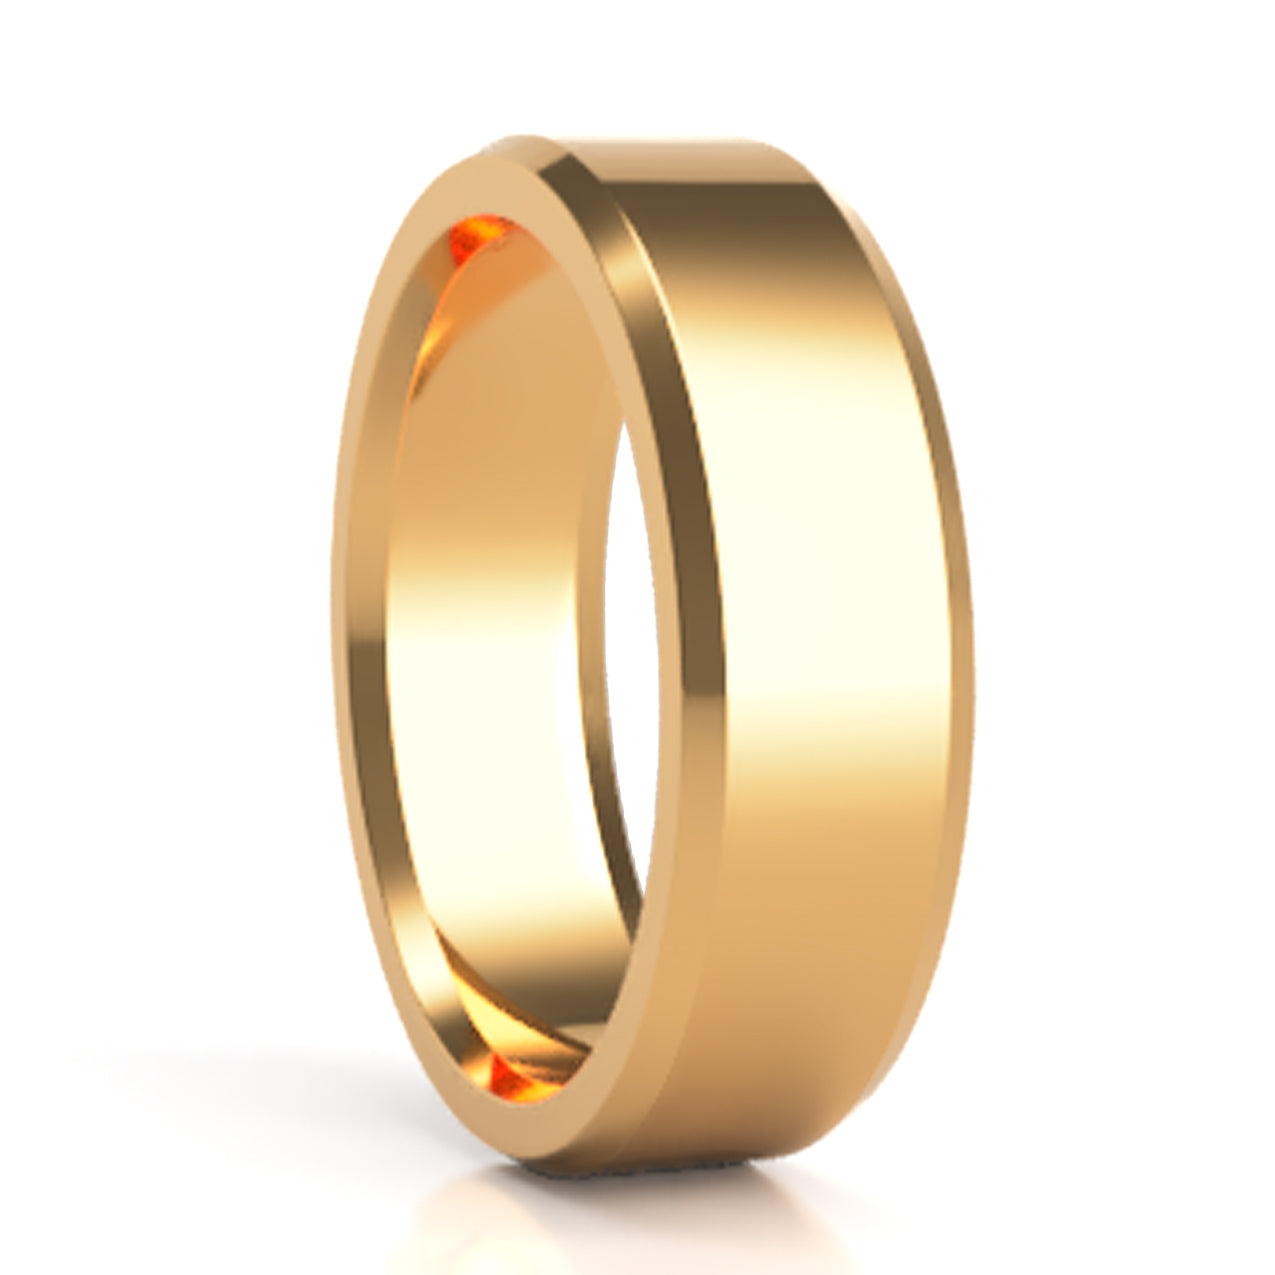 A 14k yellow gold wedding band with beveled edges displayed on a neutral white background.